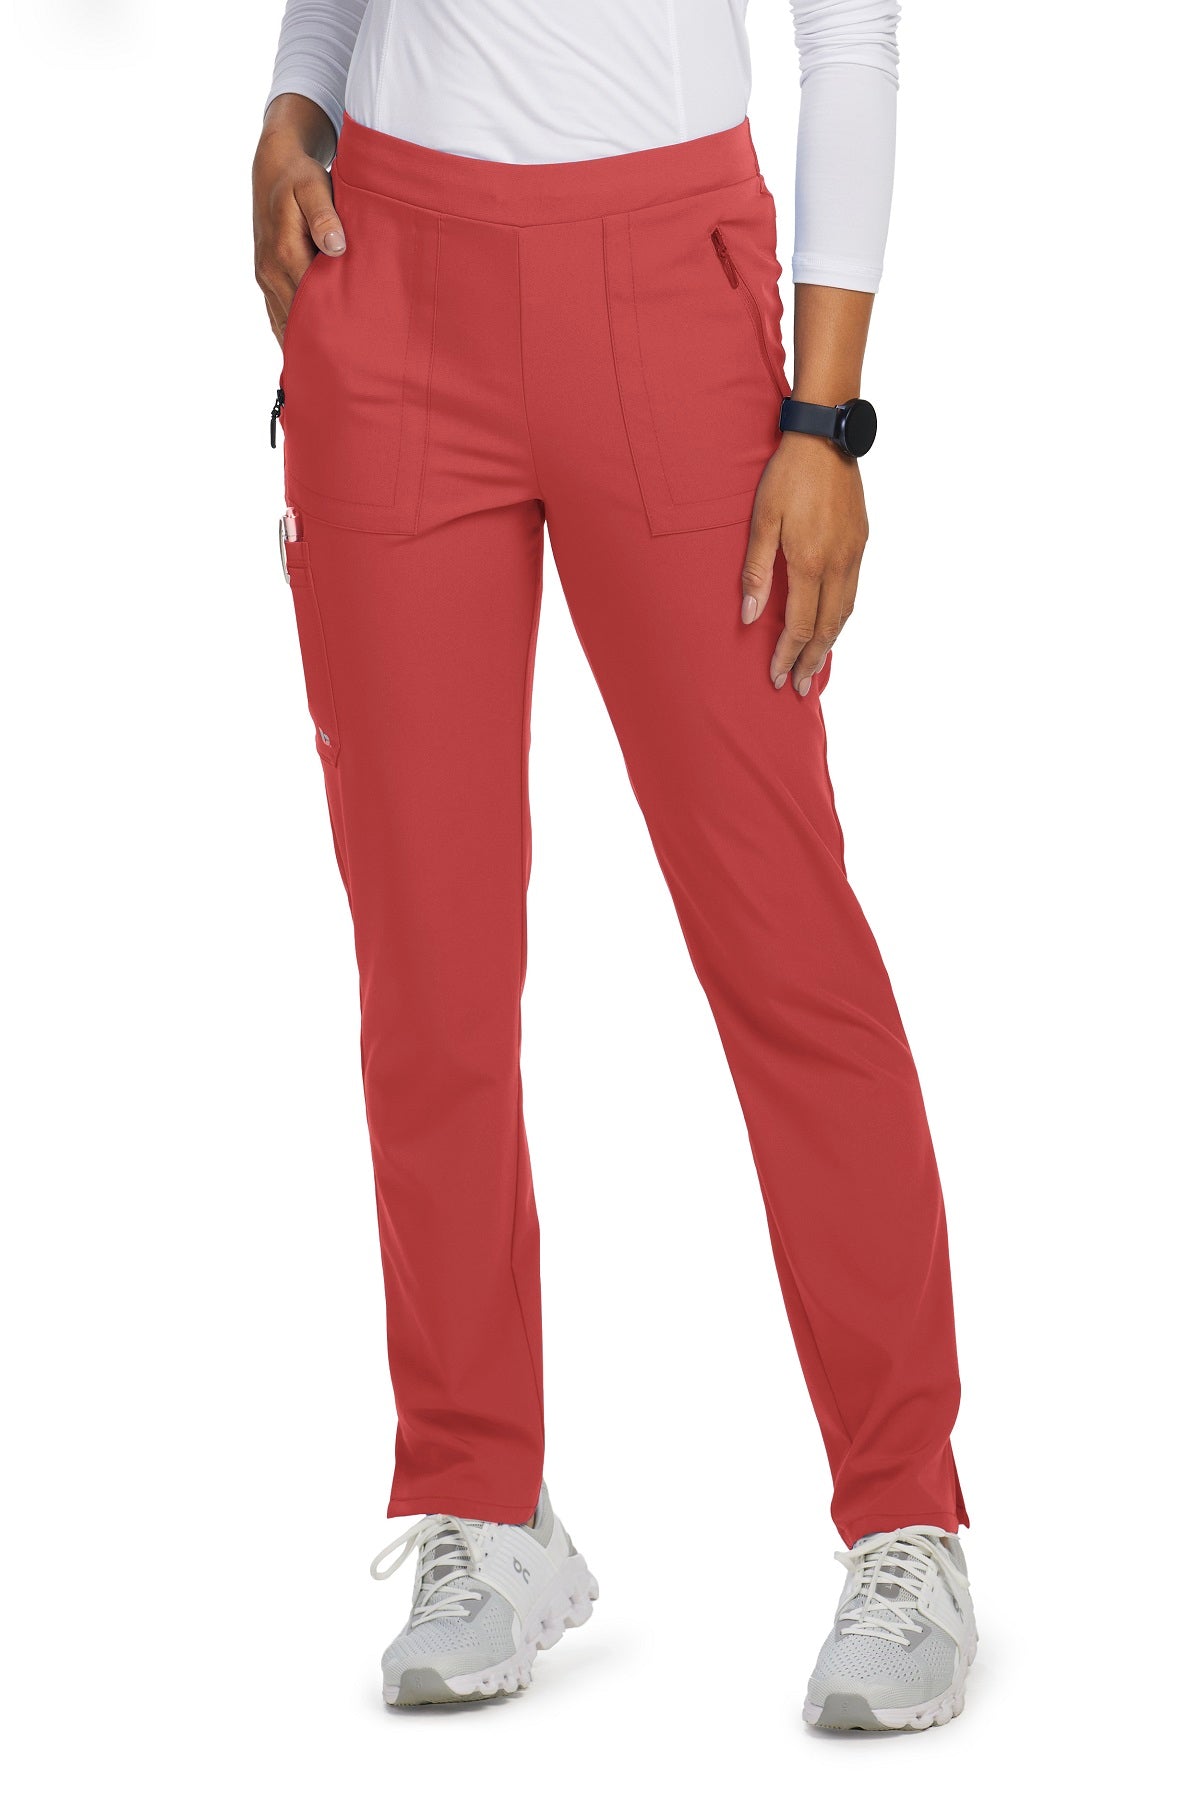 Barco Unify Scrub Pants Purpose 5 Pocket in Dusty Red at Parker's Clothing and Shoes.